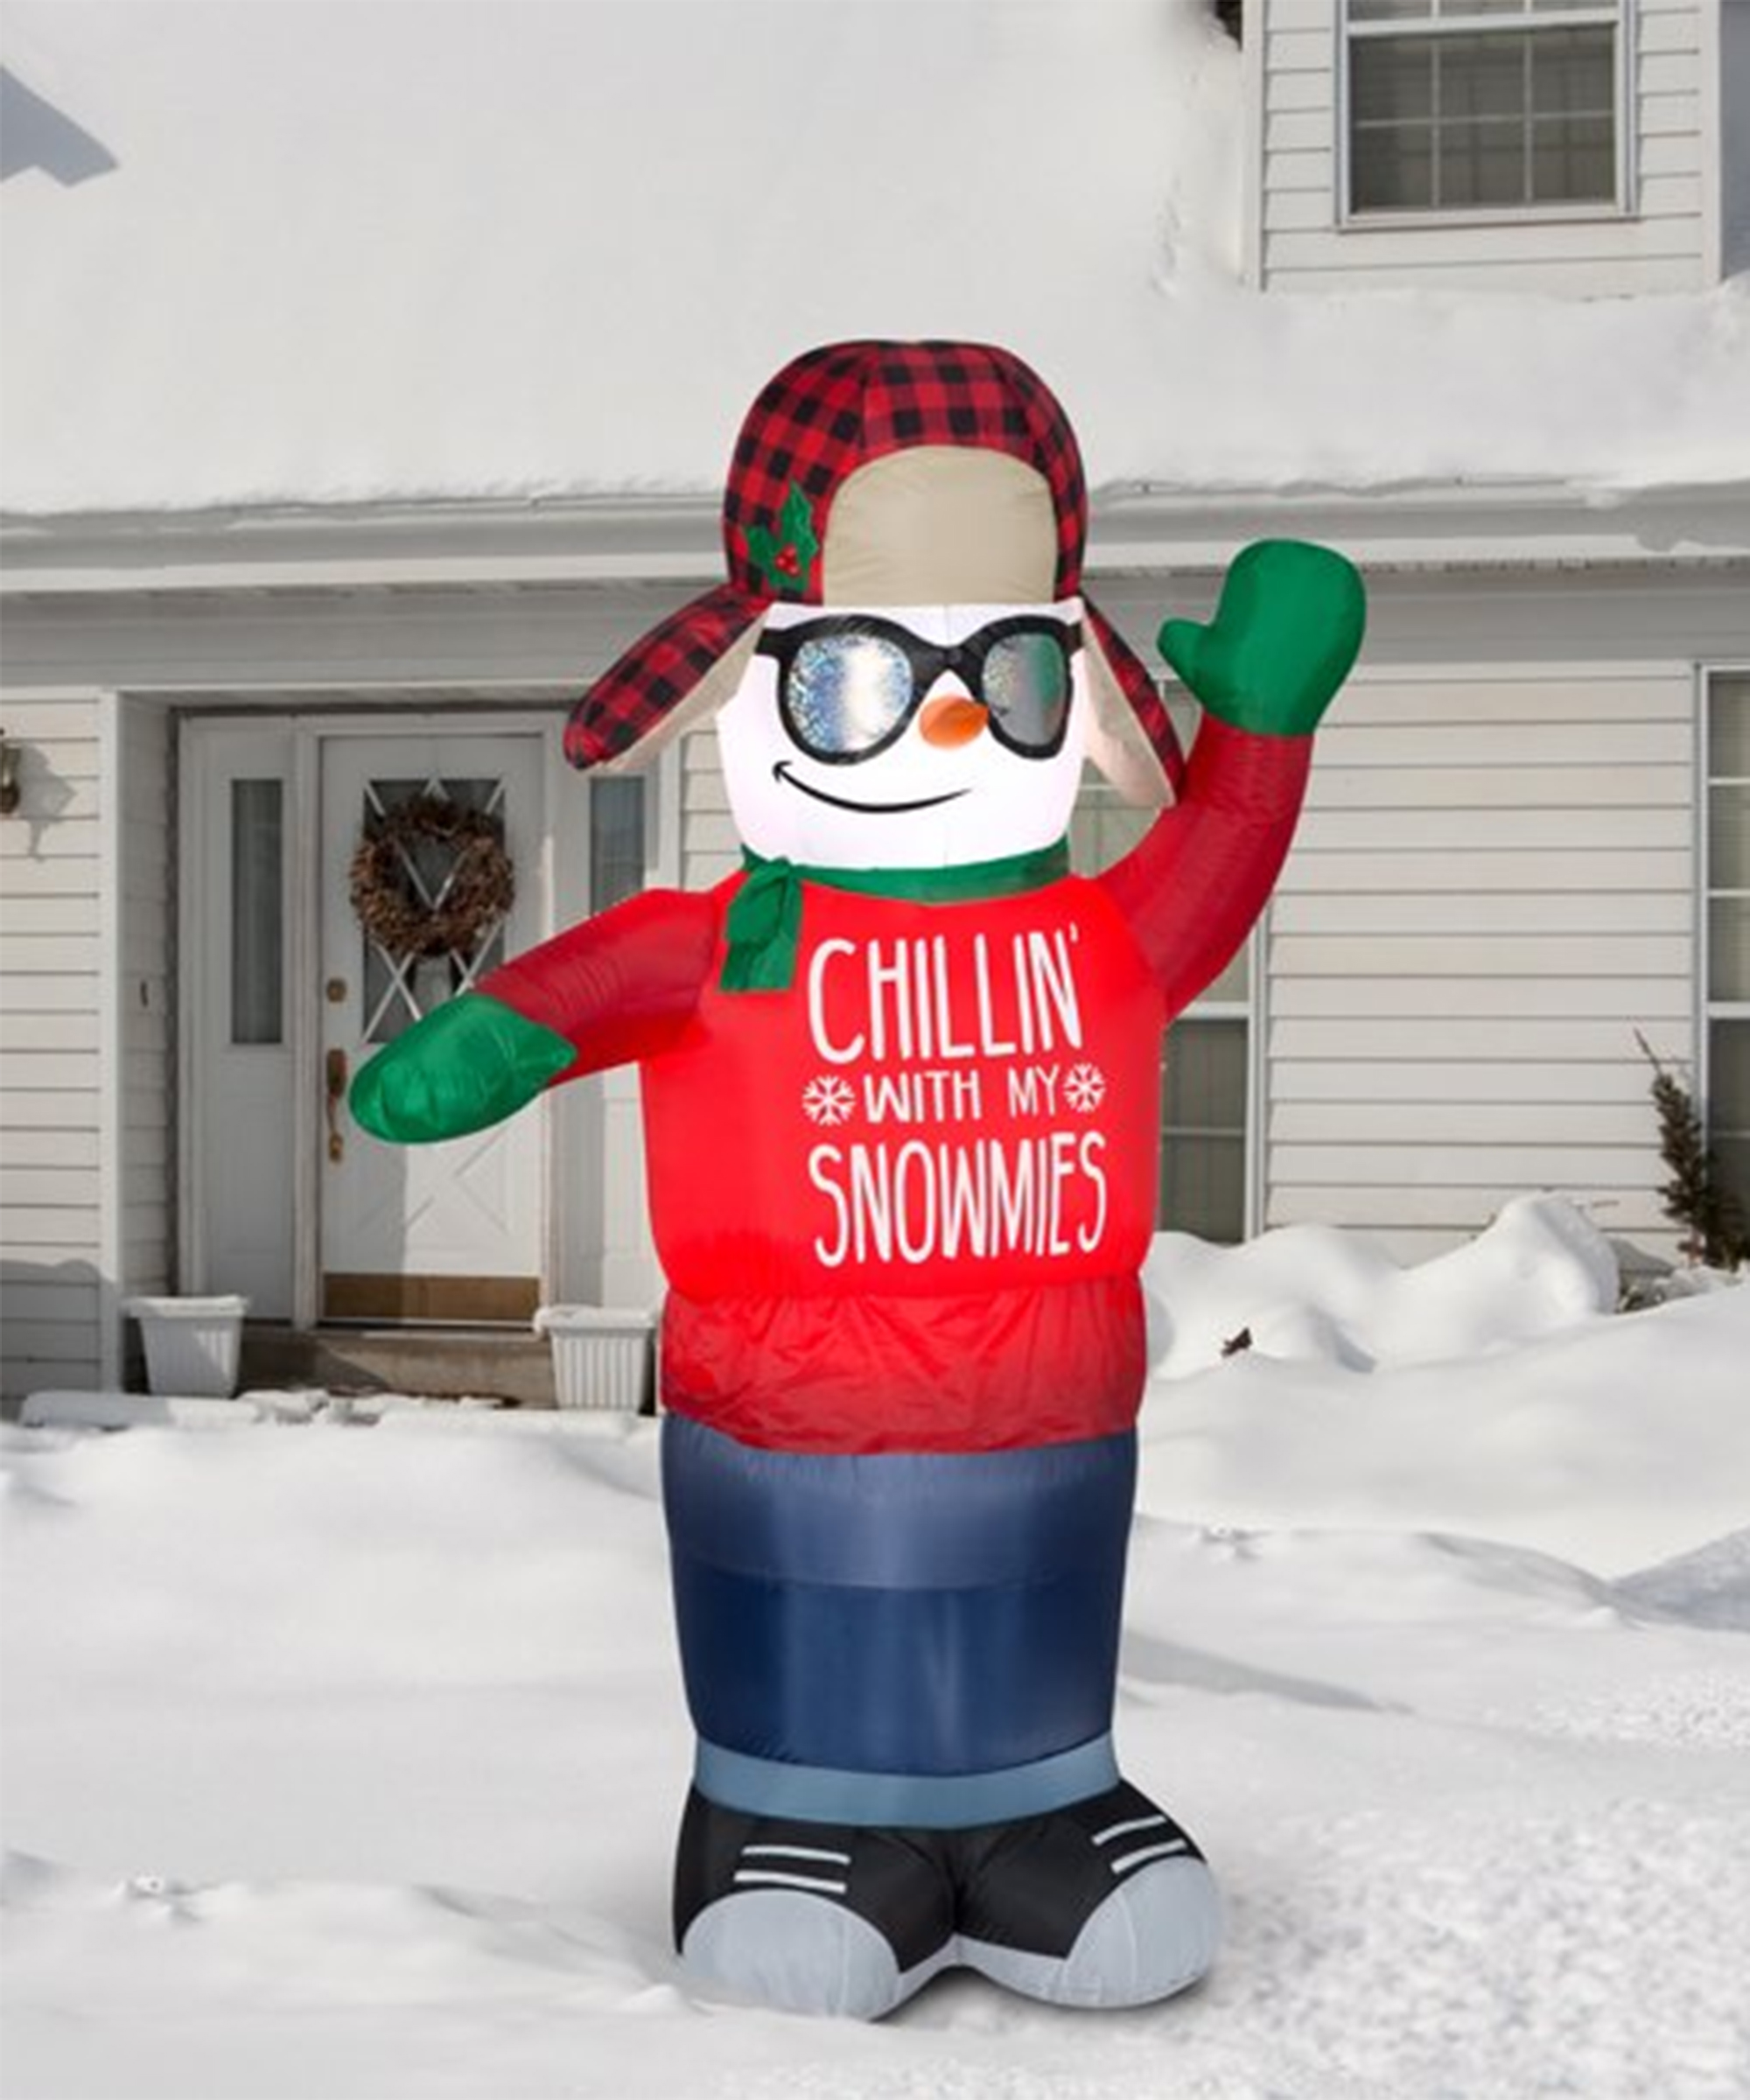 An inflatable exterior Christmas snowman decoration with 'Chillin' with my snowmies' slogan on tee shirt